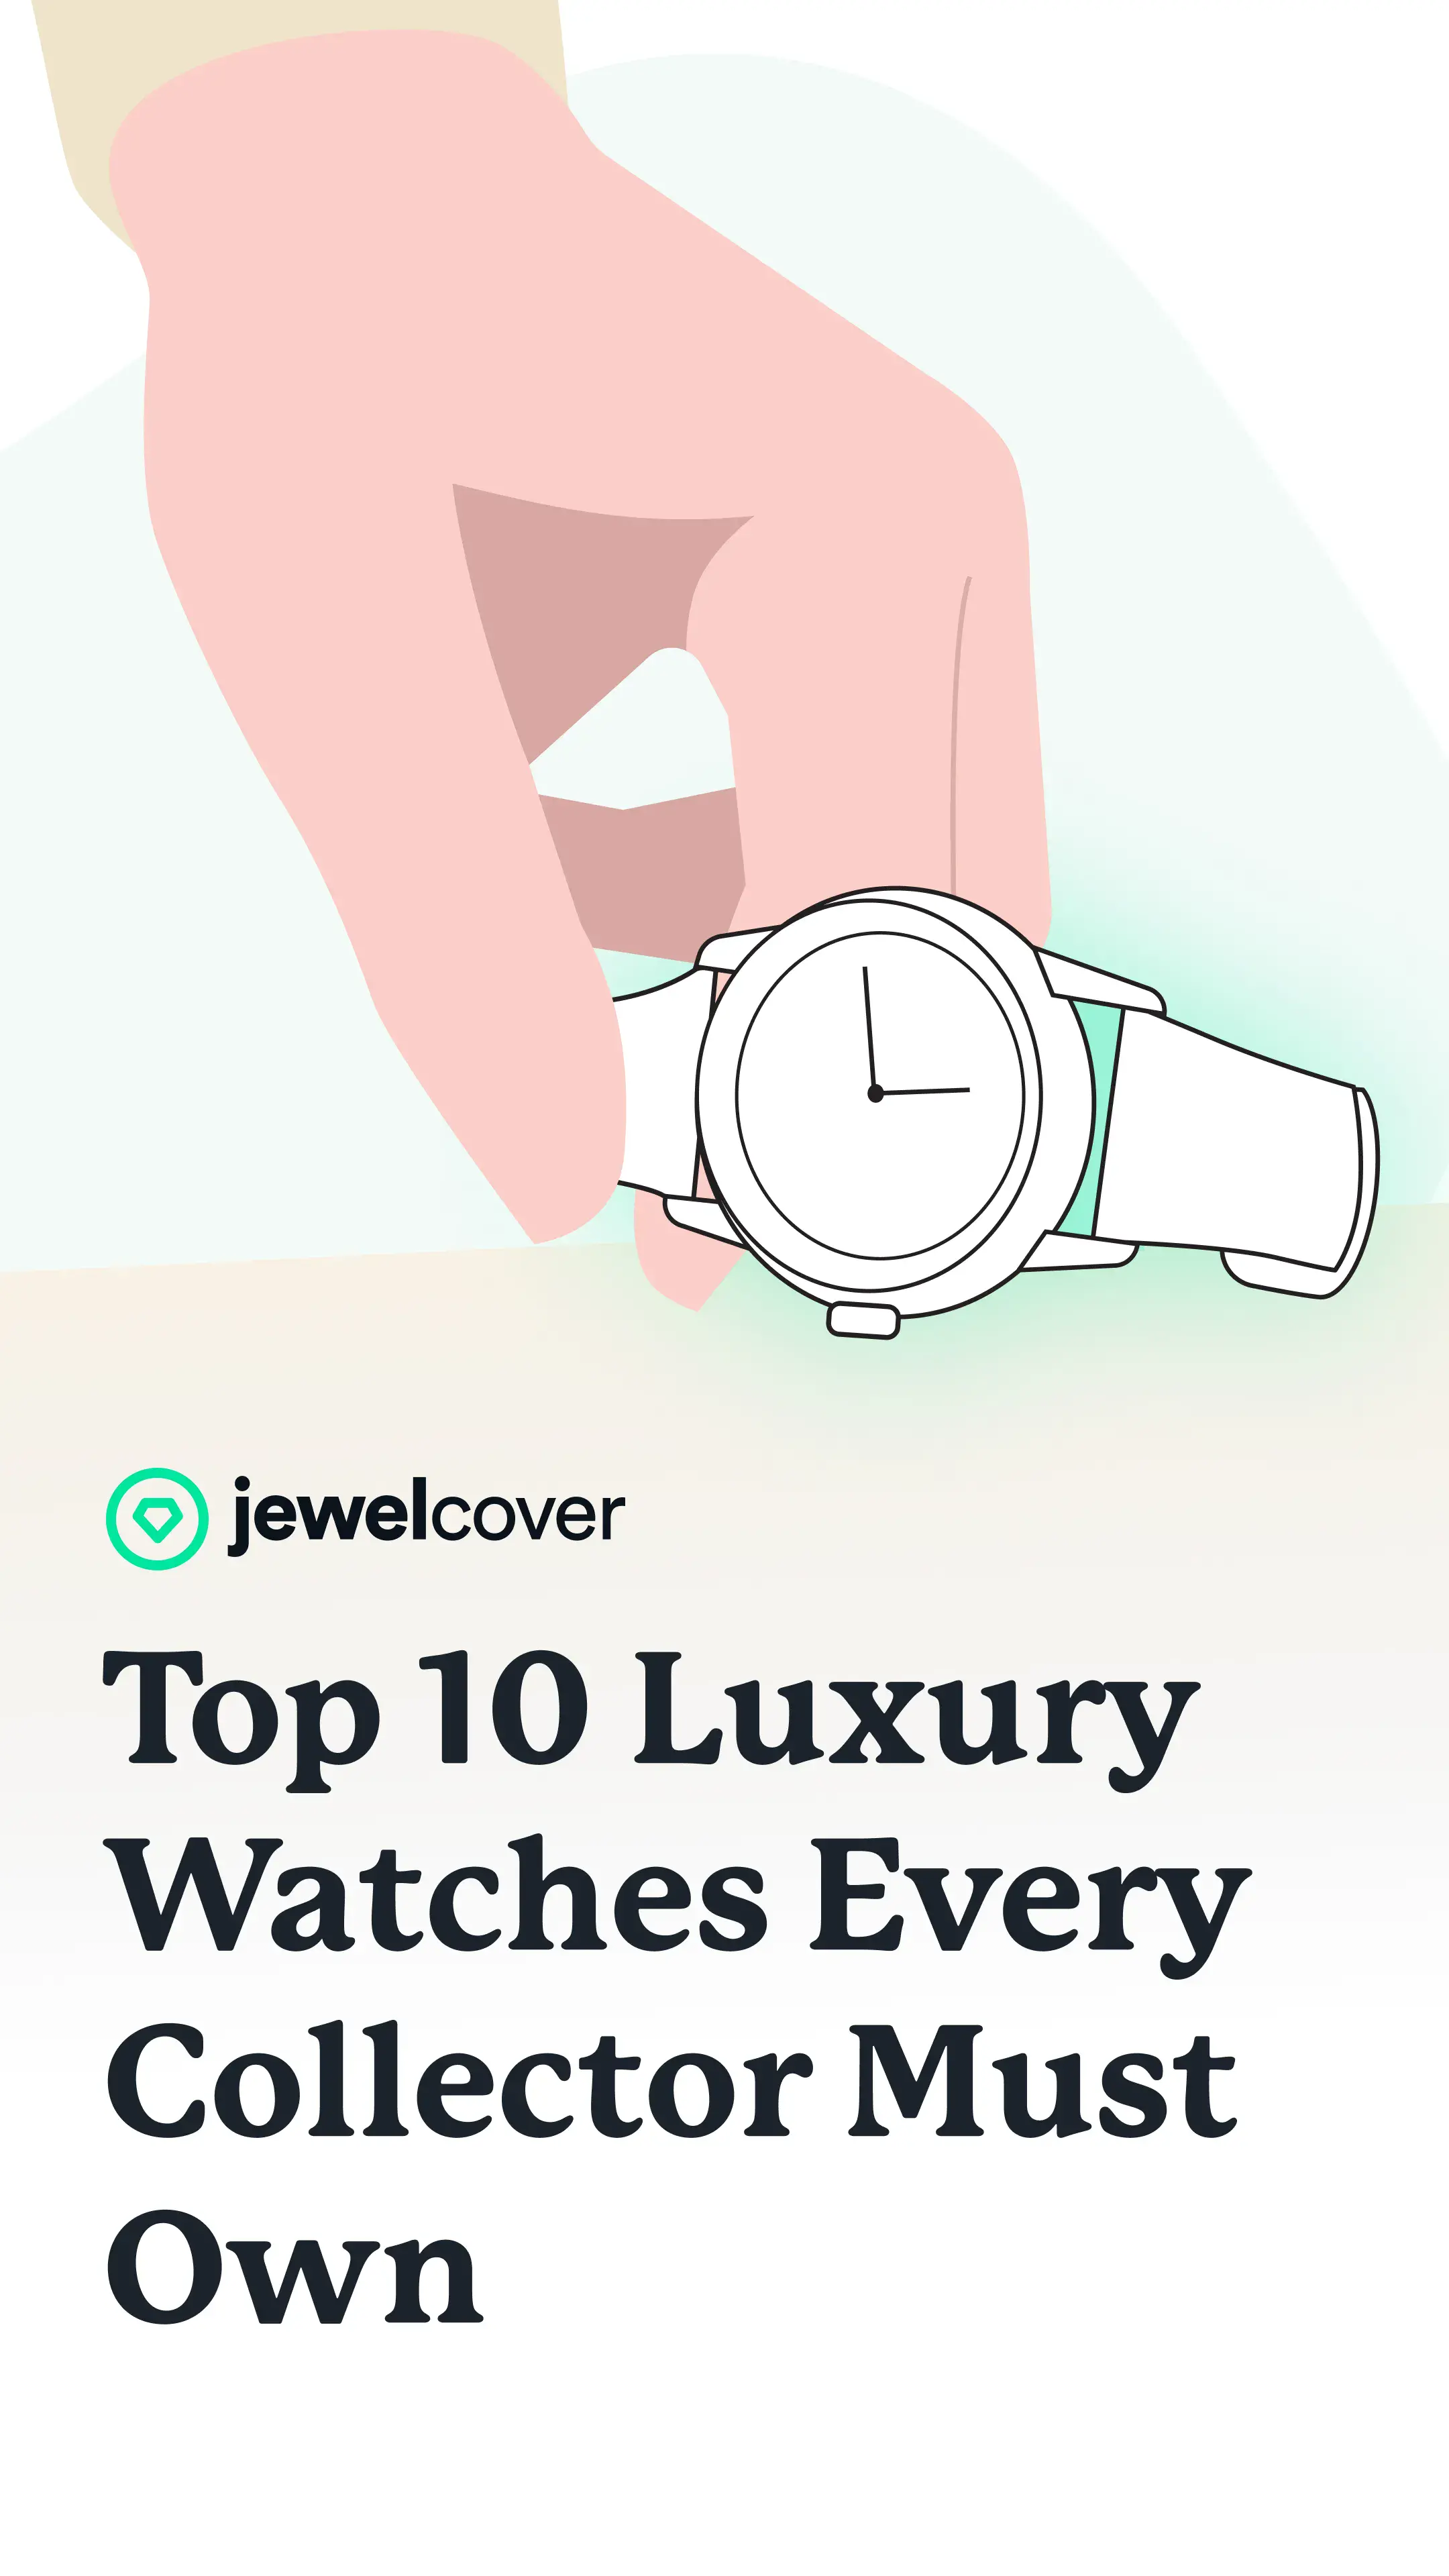 Top 10 Luxury Watches Every Collector Must Own